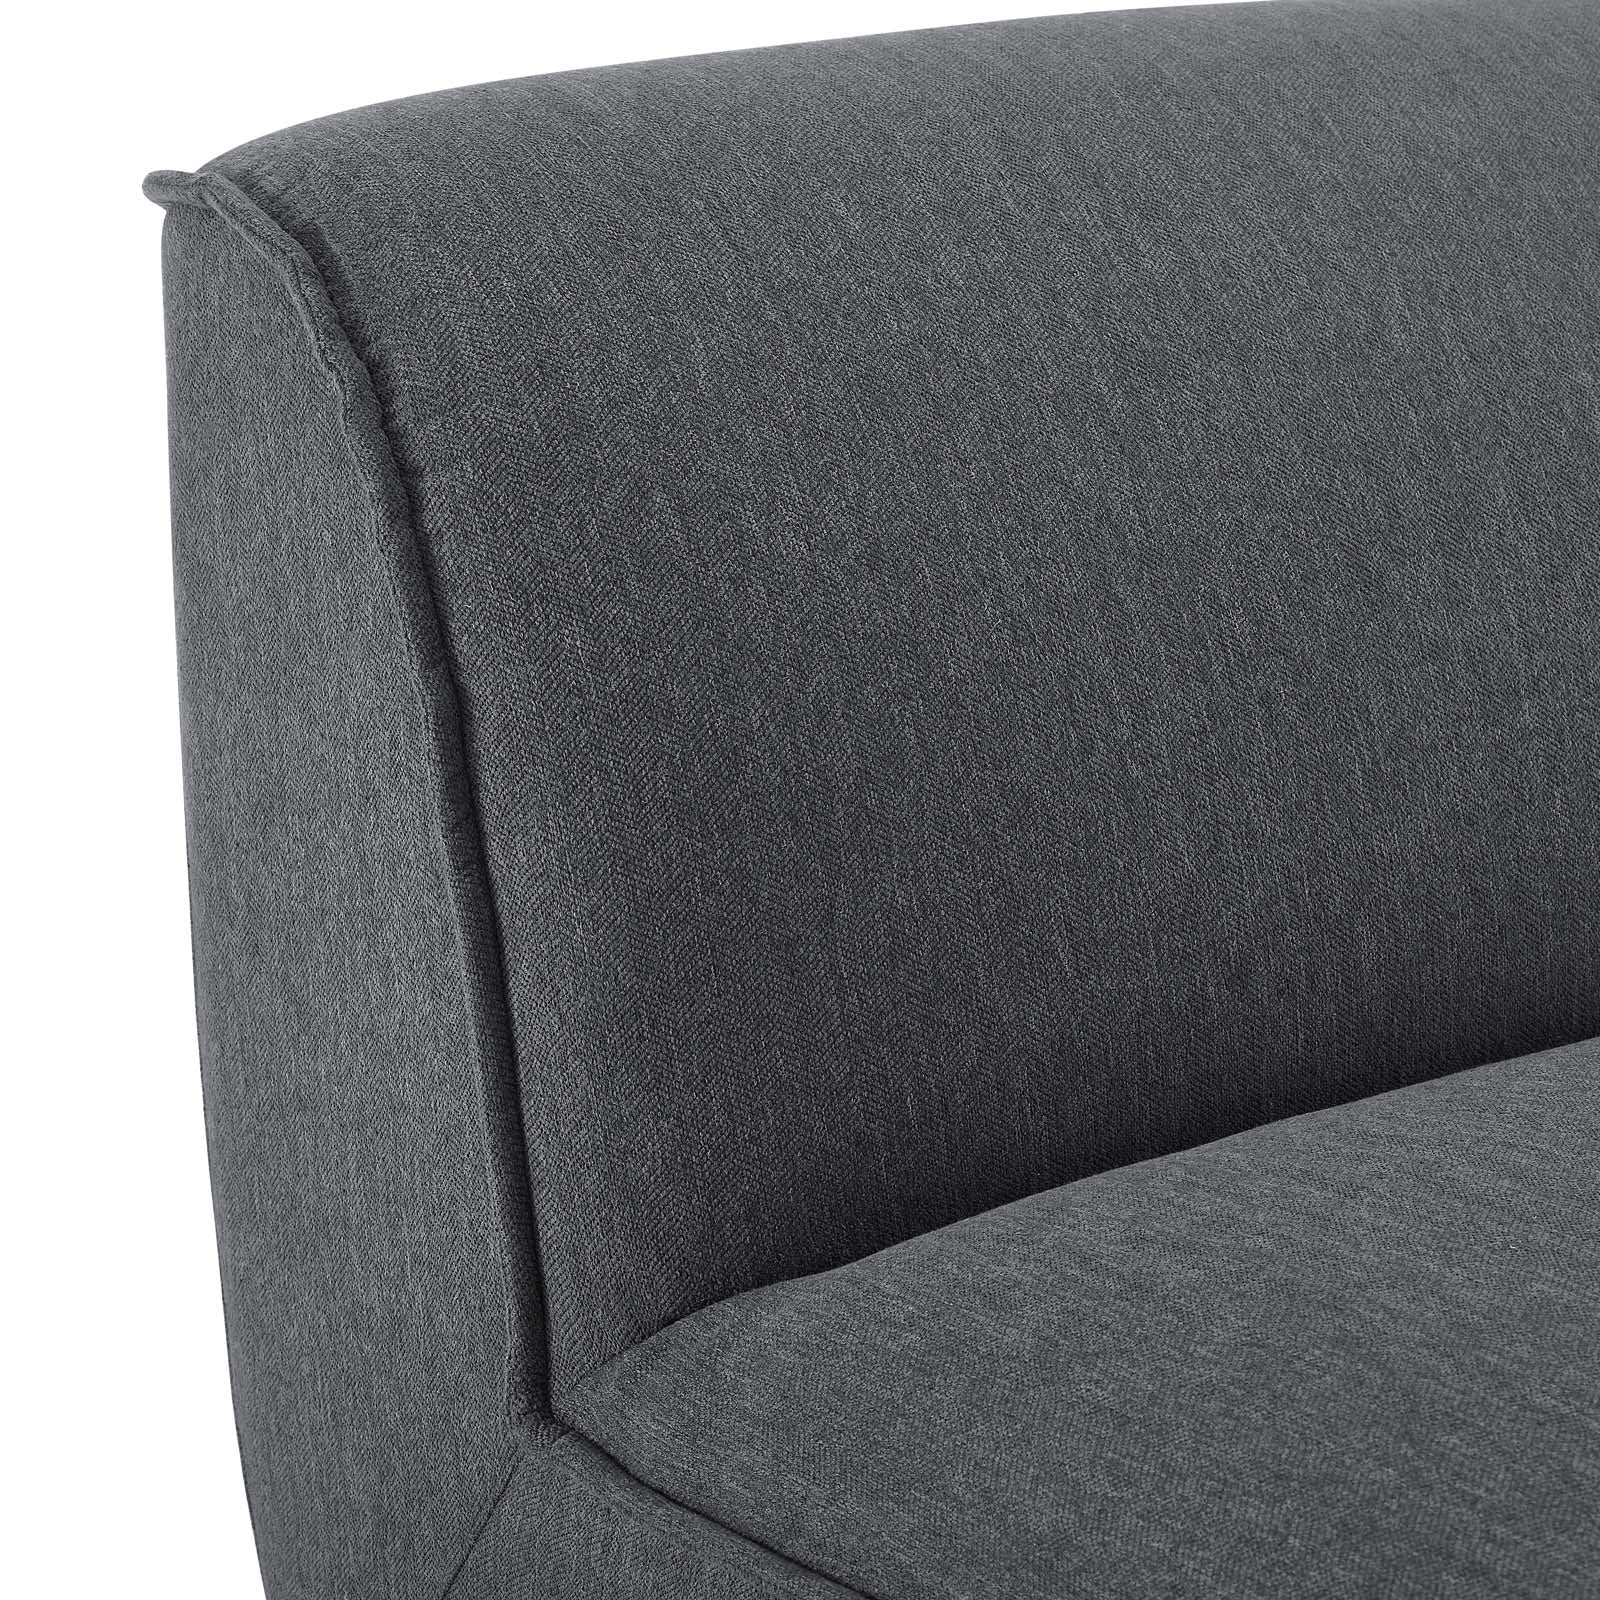 Modway Chairs - Comprise Armless Chair Charcoal